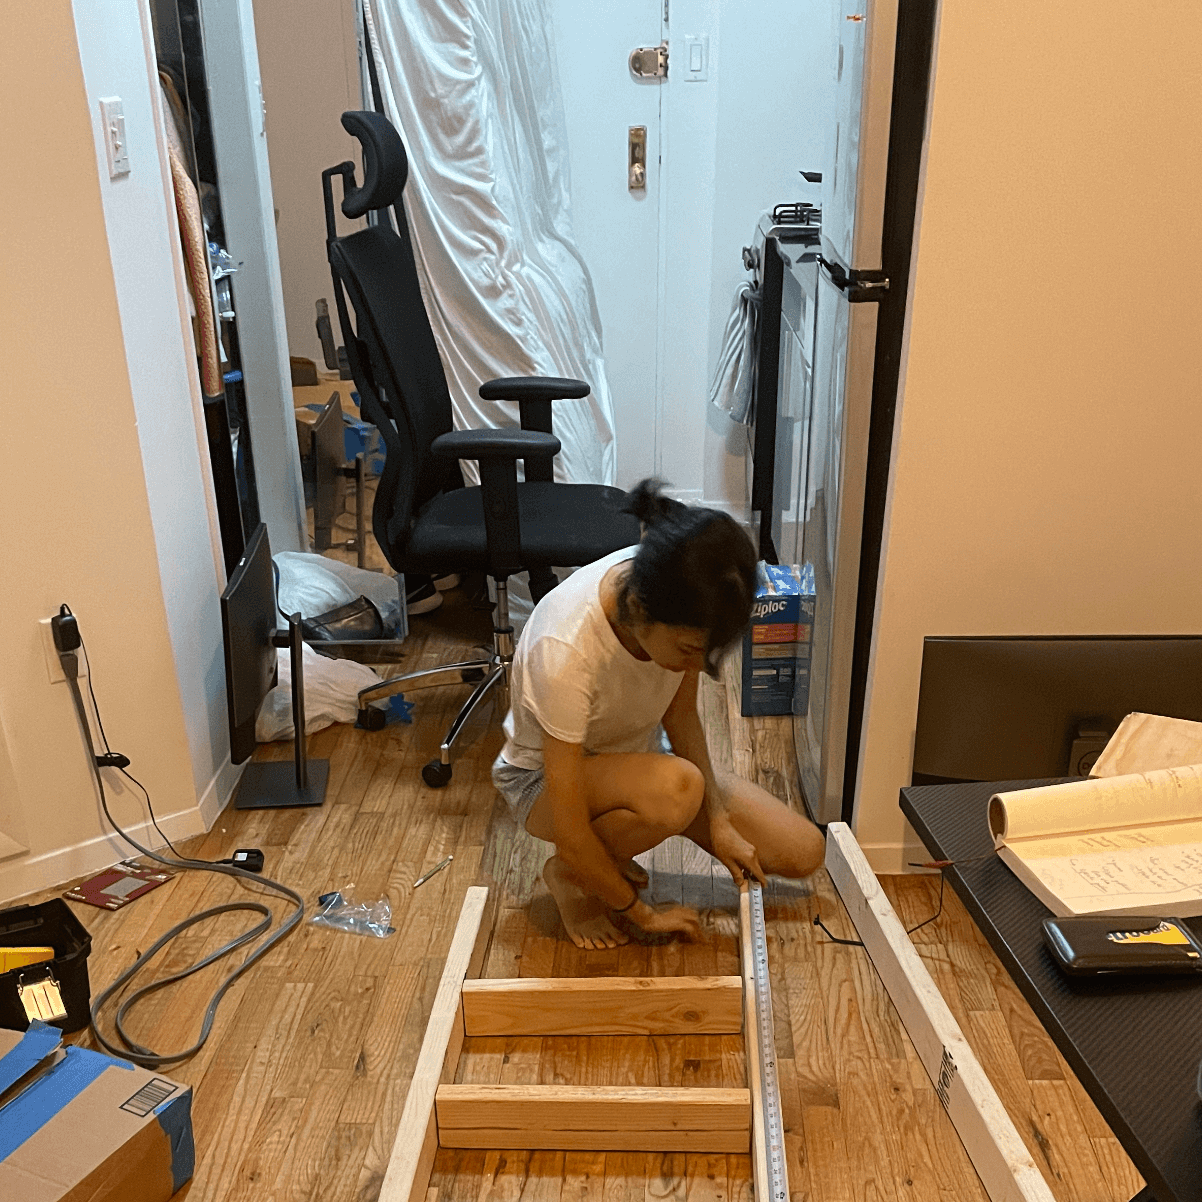 My roommate Cat arranged where we wanted the rungs to be on the ladder. In the background, you can see that during construction, we pushed my mattress, desk, and monitors to rest in the apartment doorway. 